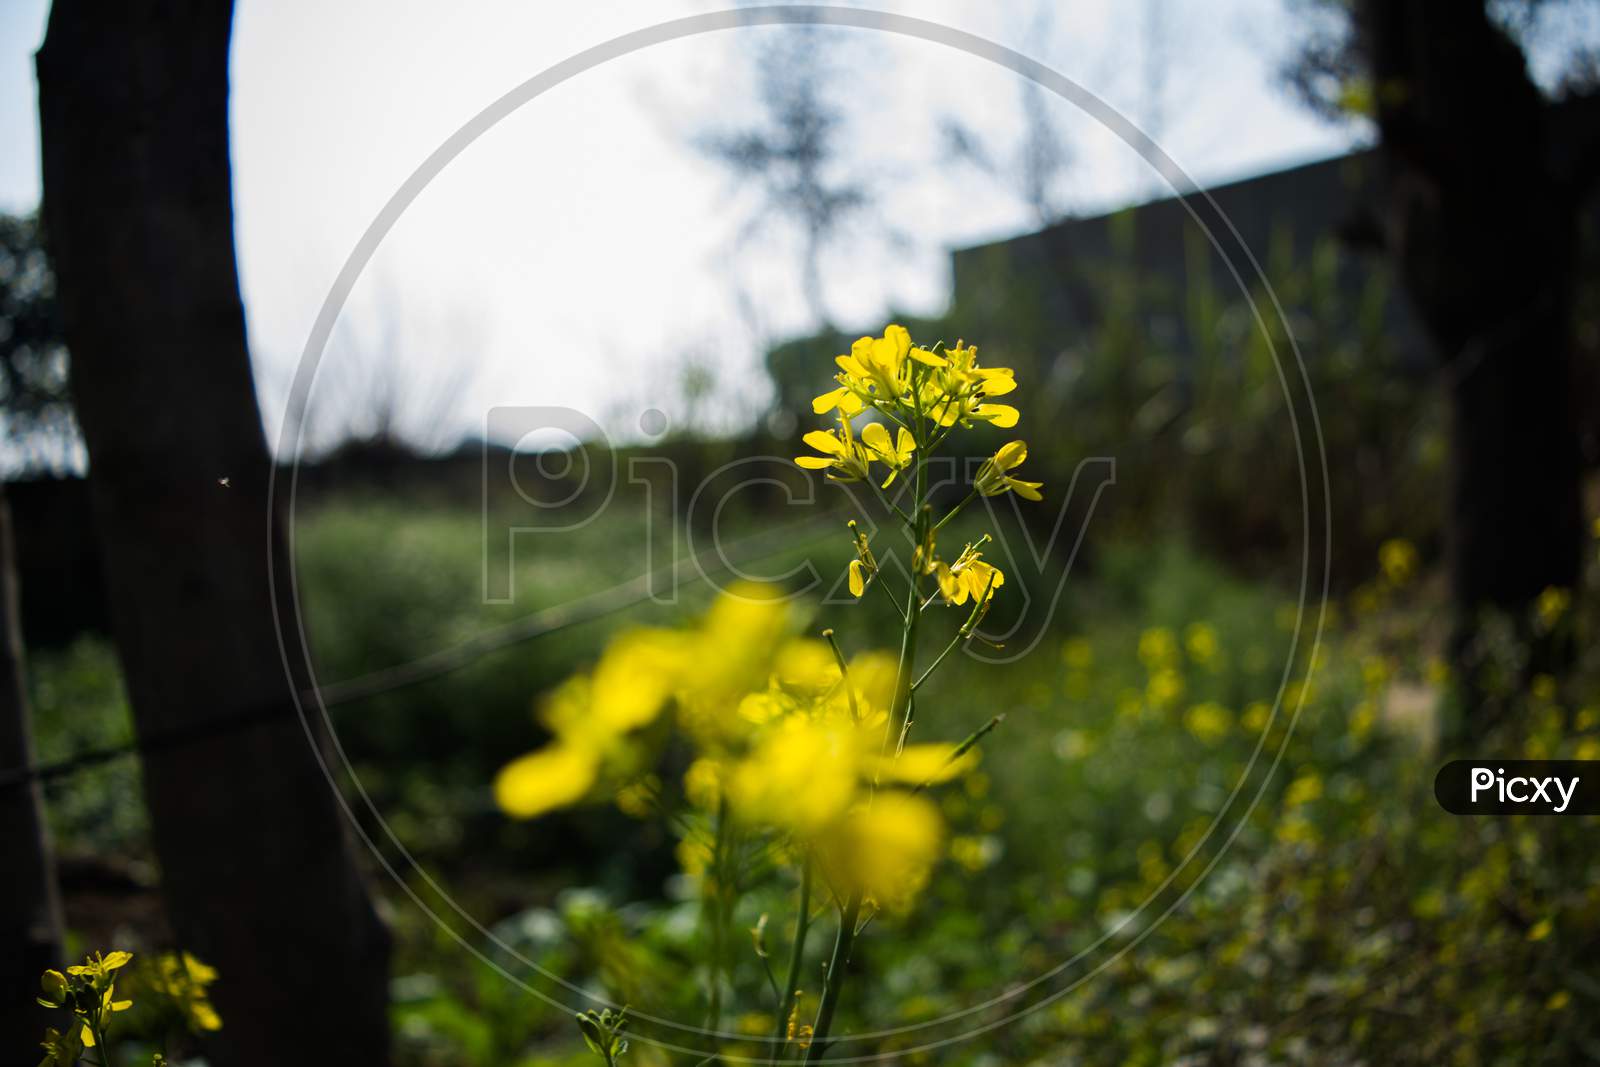 The Mustard Flower Or Plant Is A Plant Species In The Genera Brassica And Sinapis In The Family Brassicaceae.